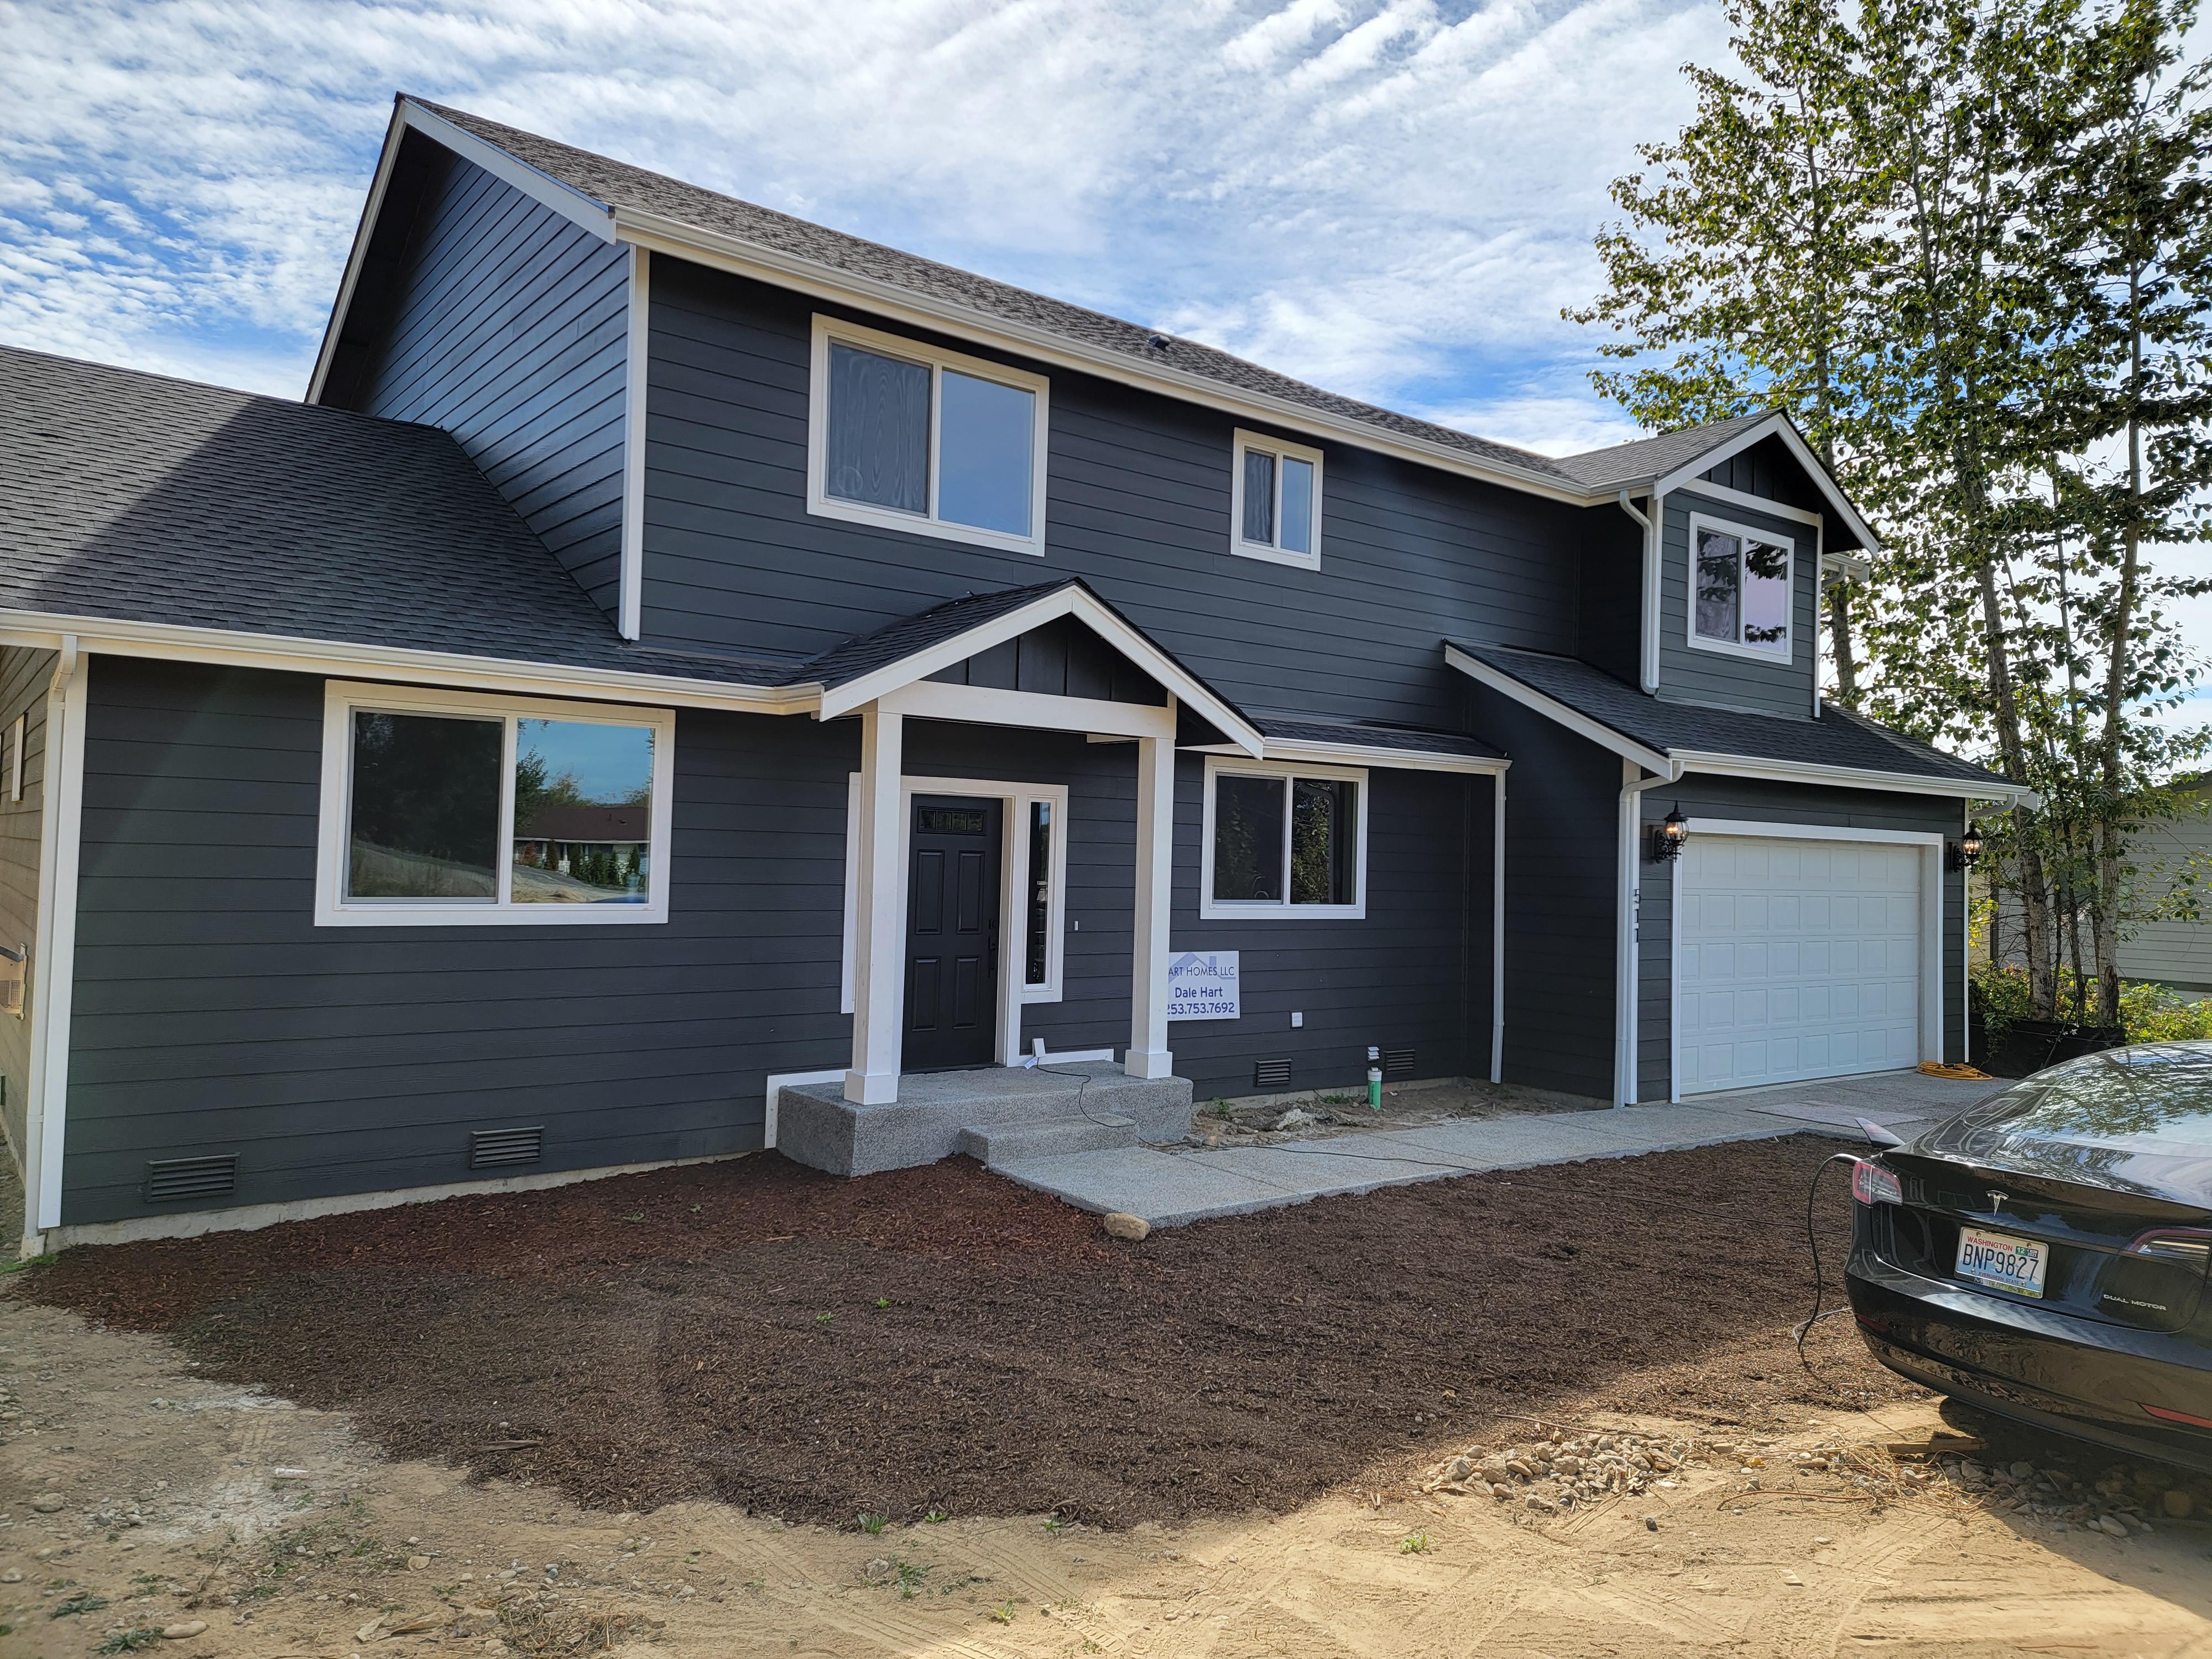 Experience the luxury of a tailor-made home with Hart Homes LLC, your premier custom home builder in Tahuya, WA. We turn your vision into reality, crafting homes that perfectly suit your lifestyle and preferences.